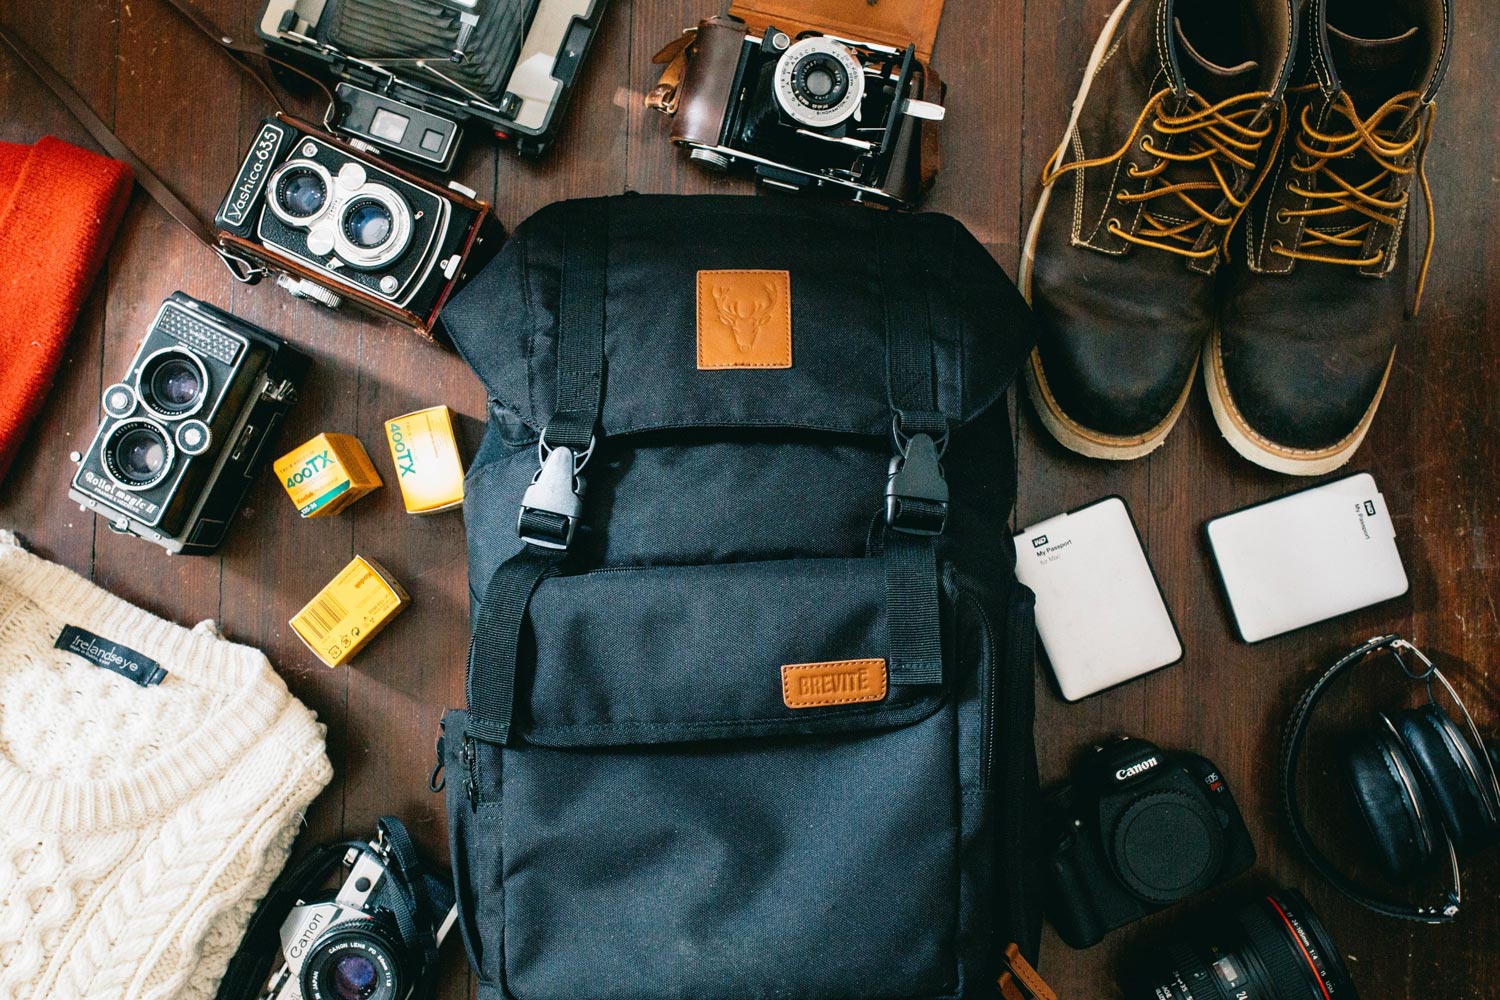  Don’t end up with a broken camera, by keeping it in a protective case or bag.